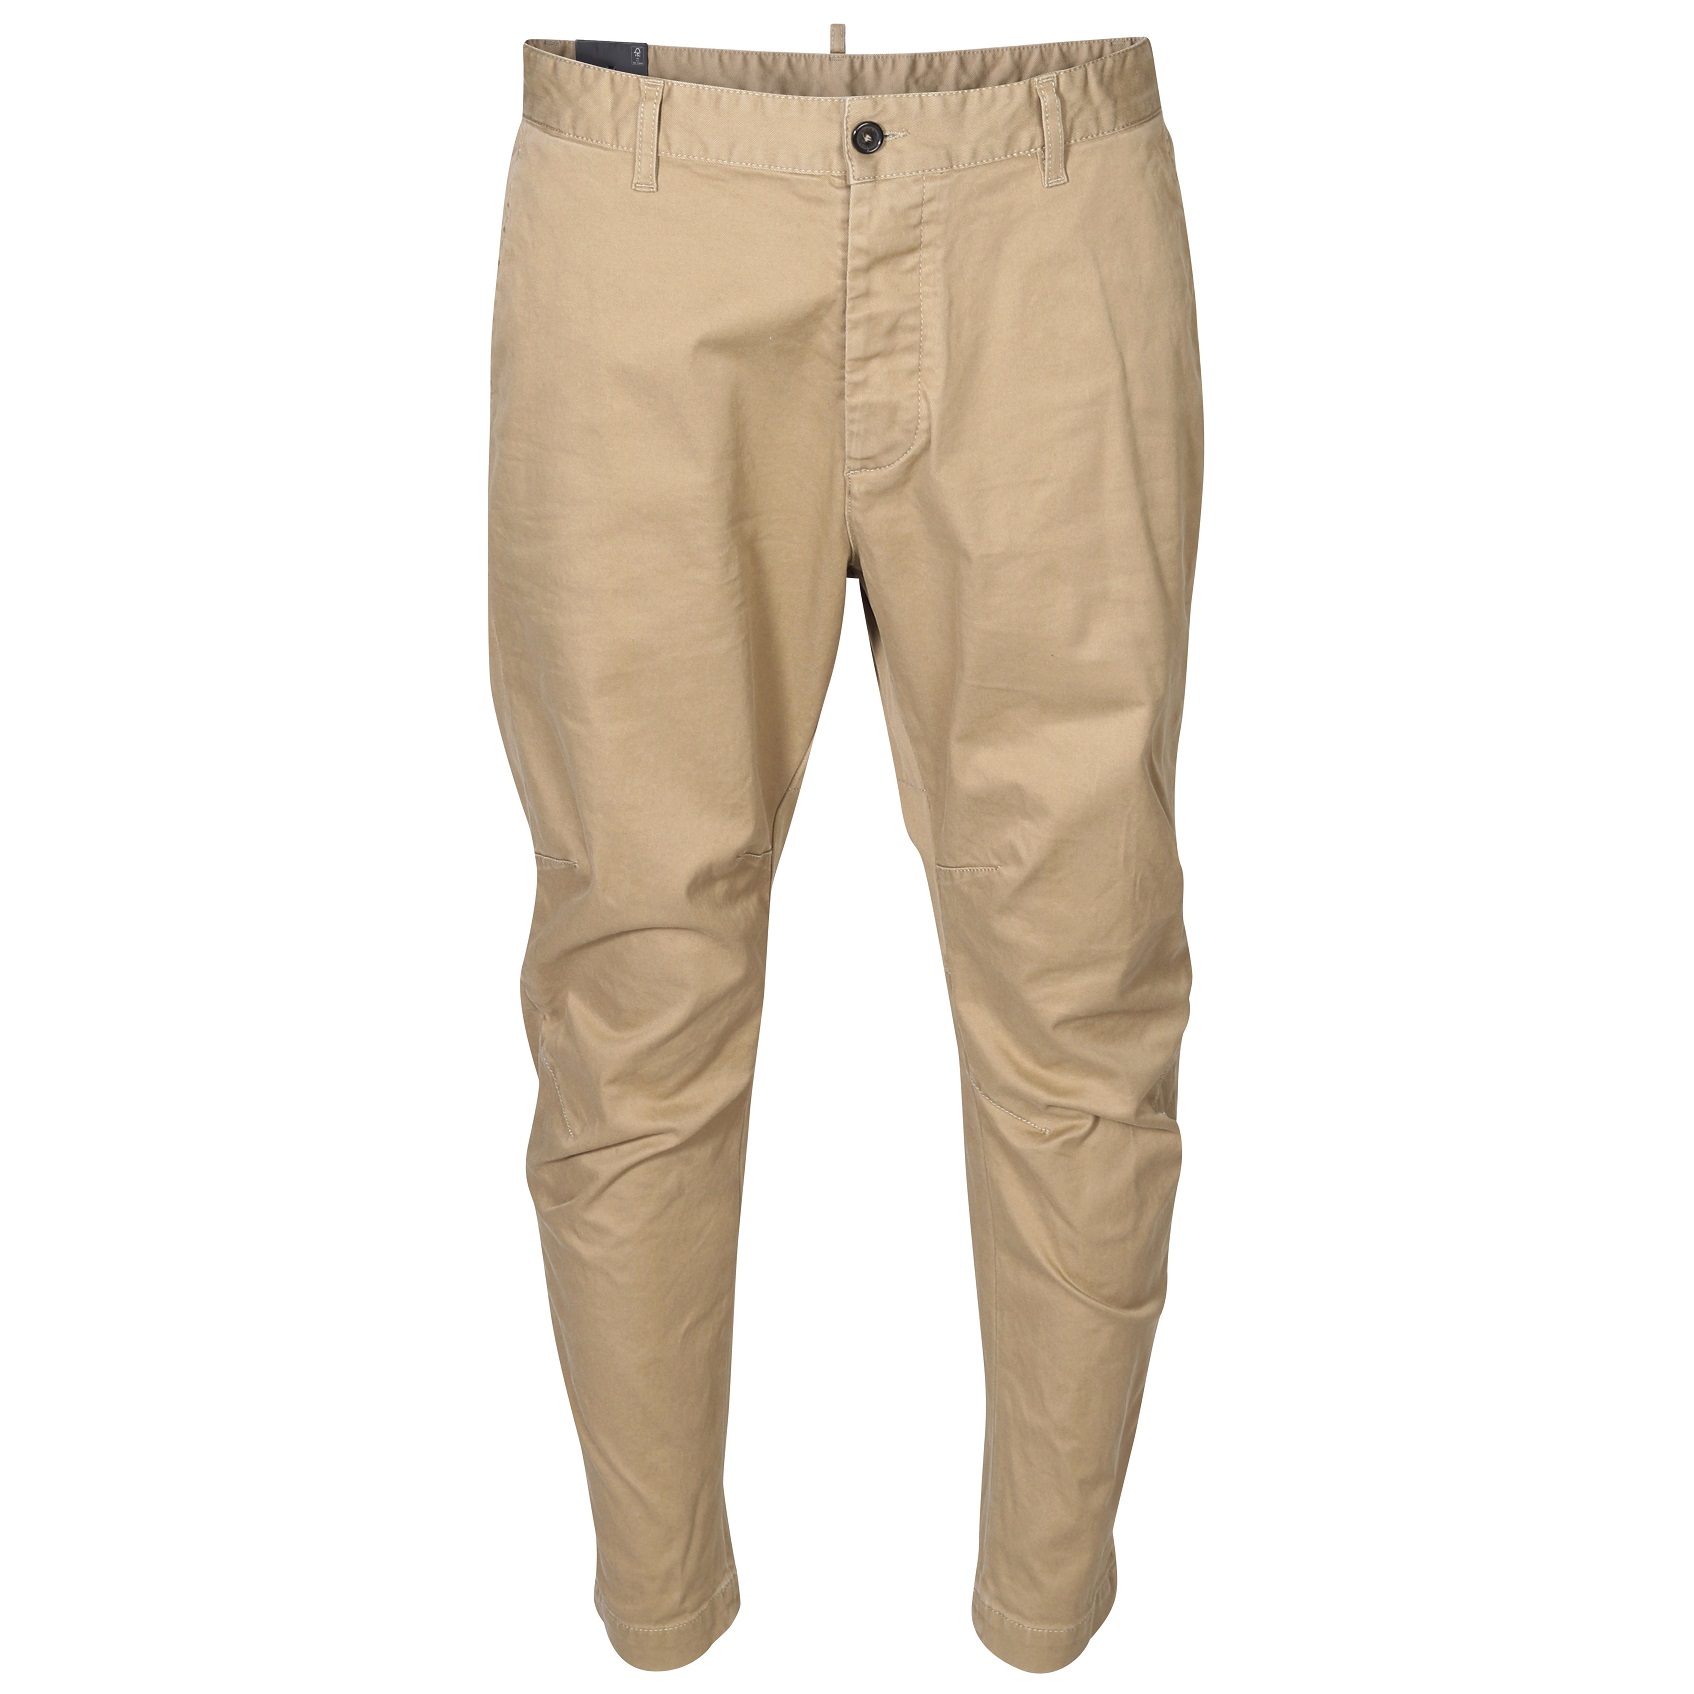 DSQUARED2 Sexy Chino Pant in Beige